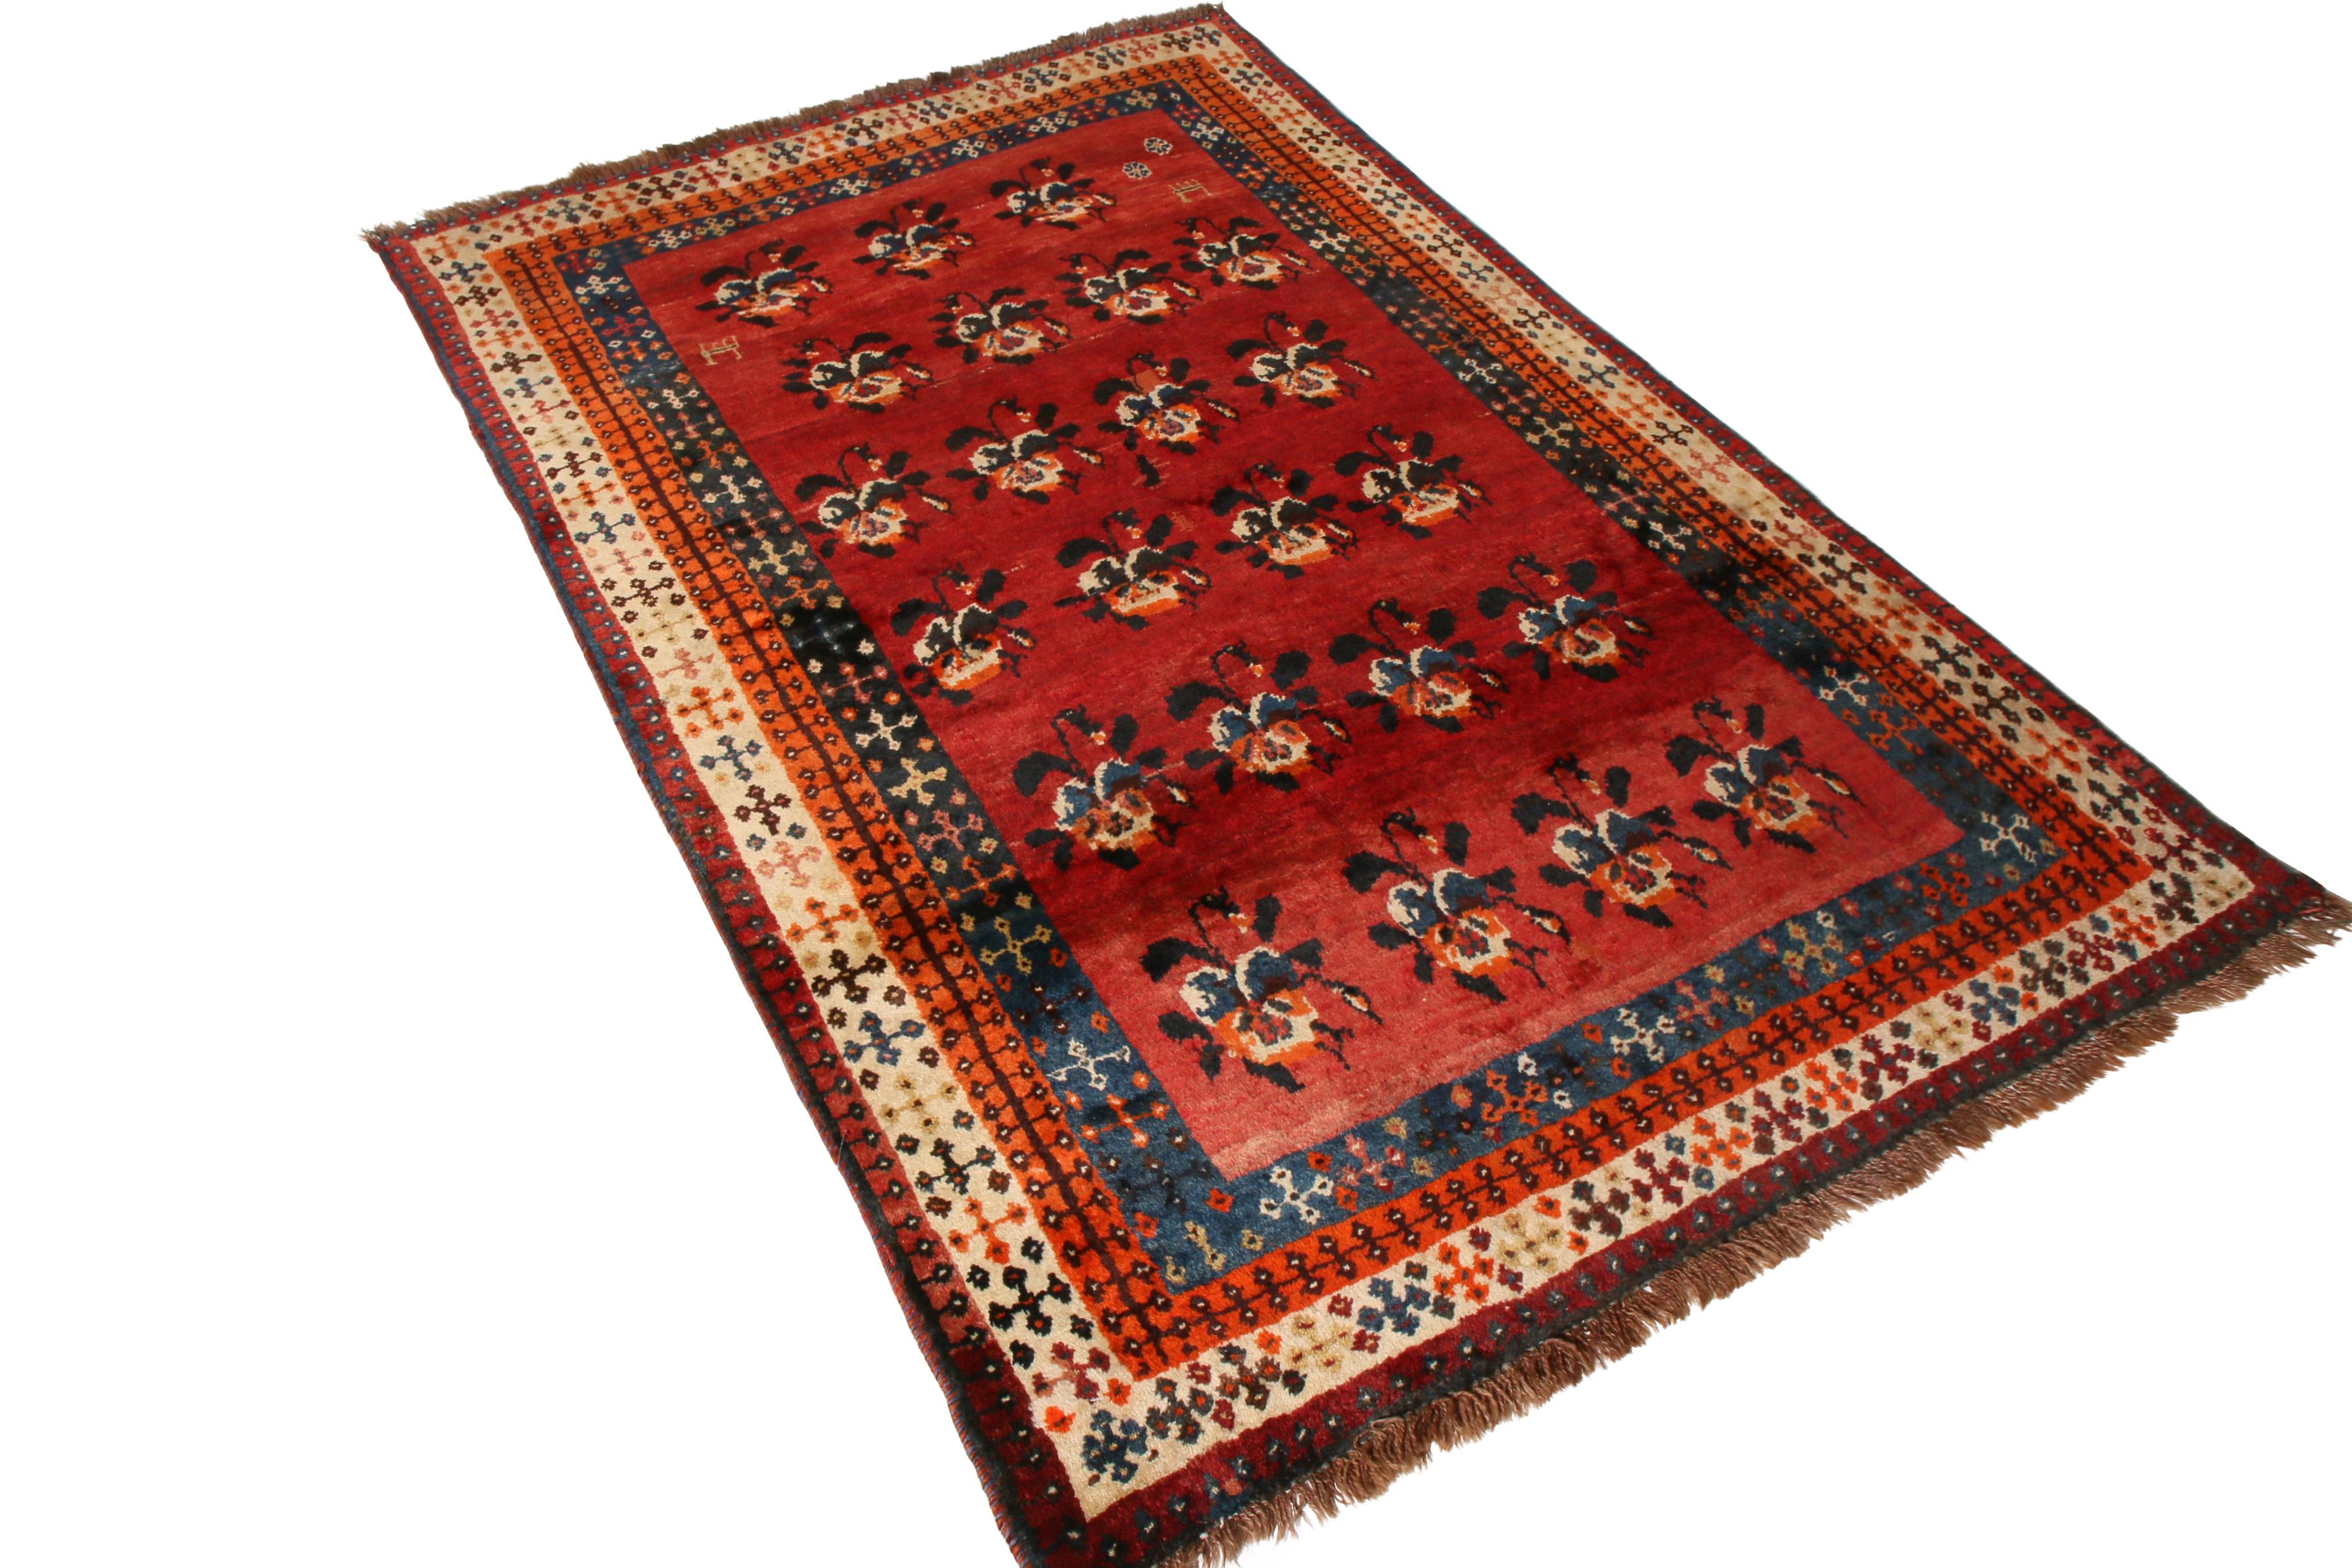 Hand knotted by the Gabbeh Persian tribal weavers circa 1950-1960, this vintage midcentury floral rug enjoys a rich play of warm color and inviting repetition, juxtaposing a burnt red and deep blue colorway in the repeating floral pattern as well as